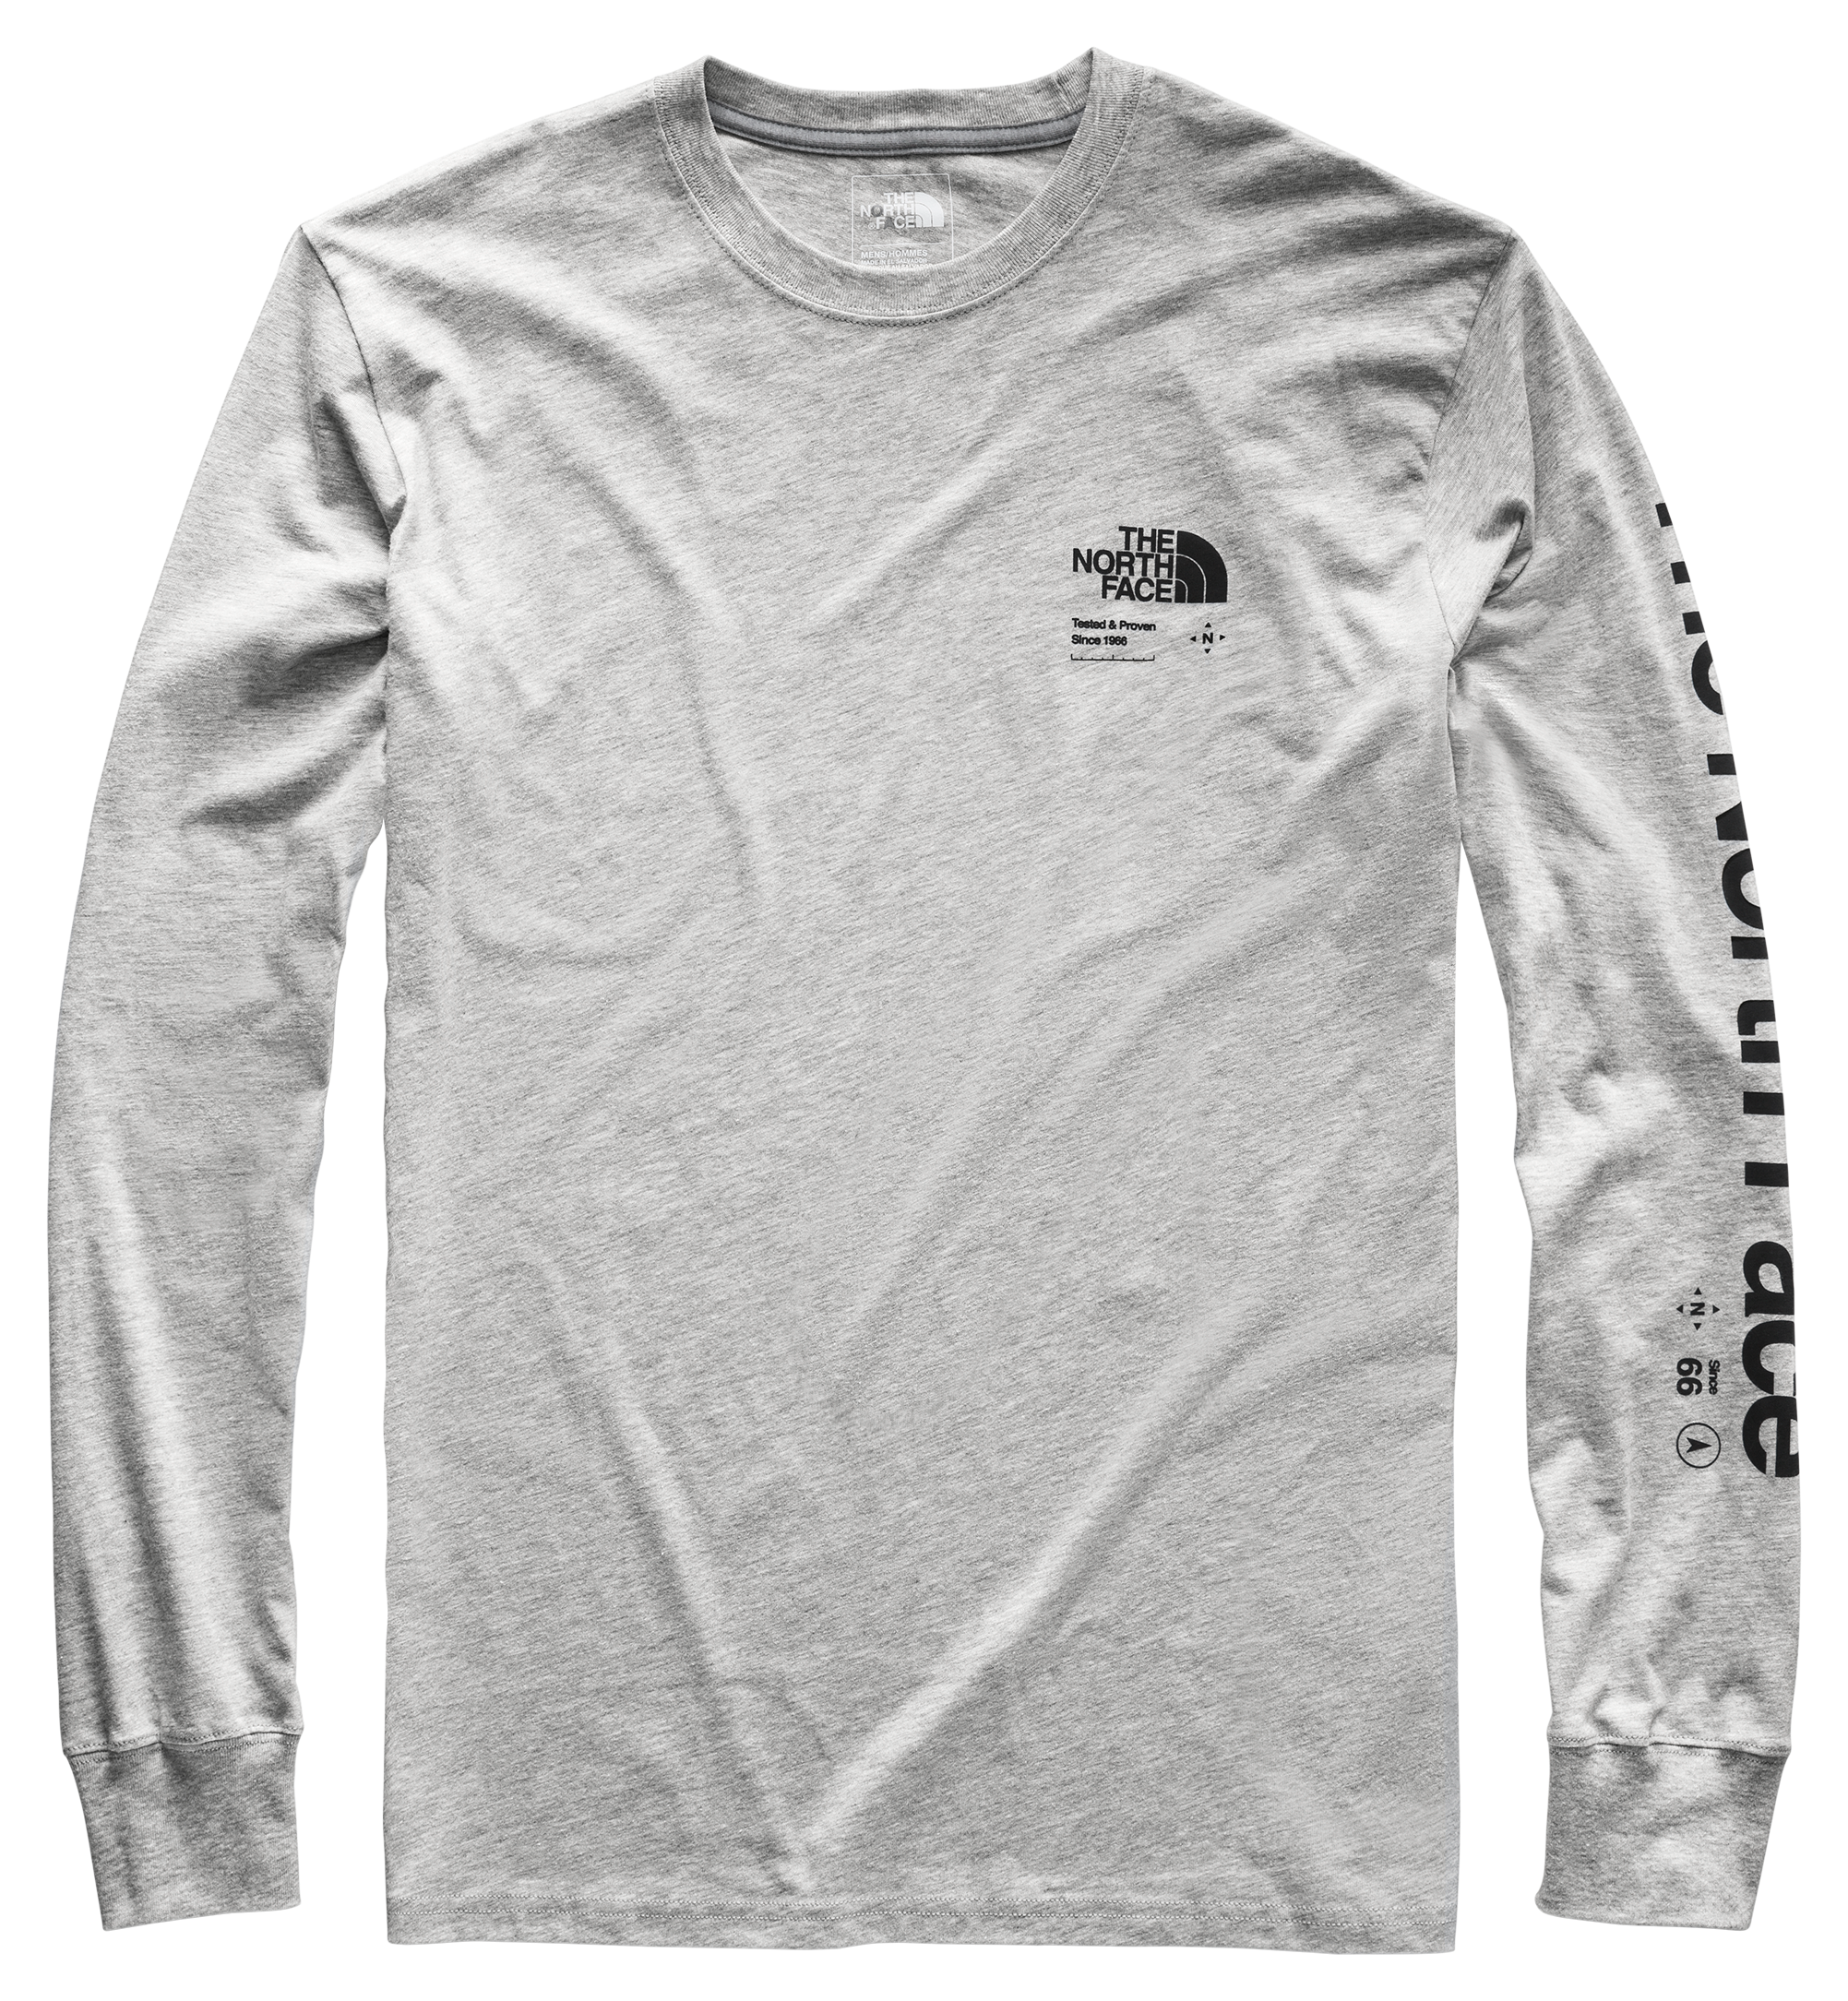 The North Face Half Dome Explore T-Shirt for Men